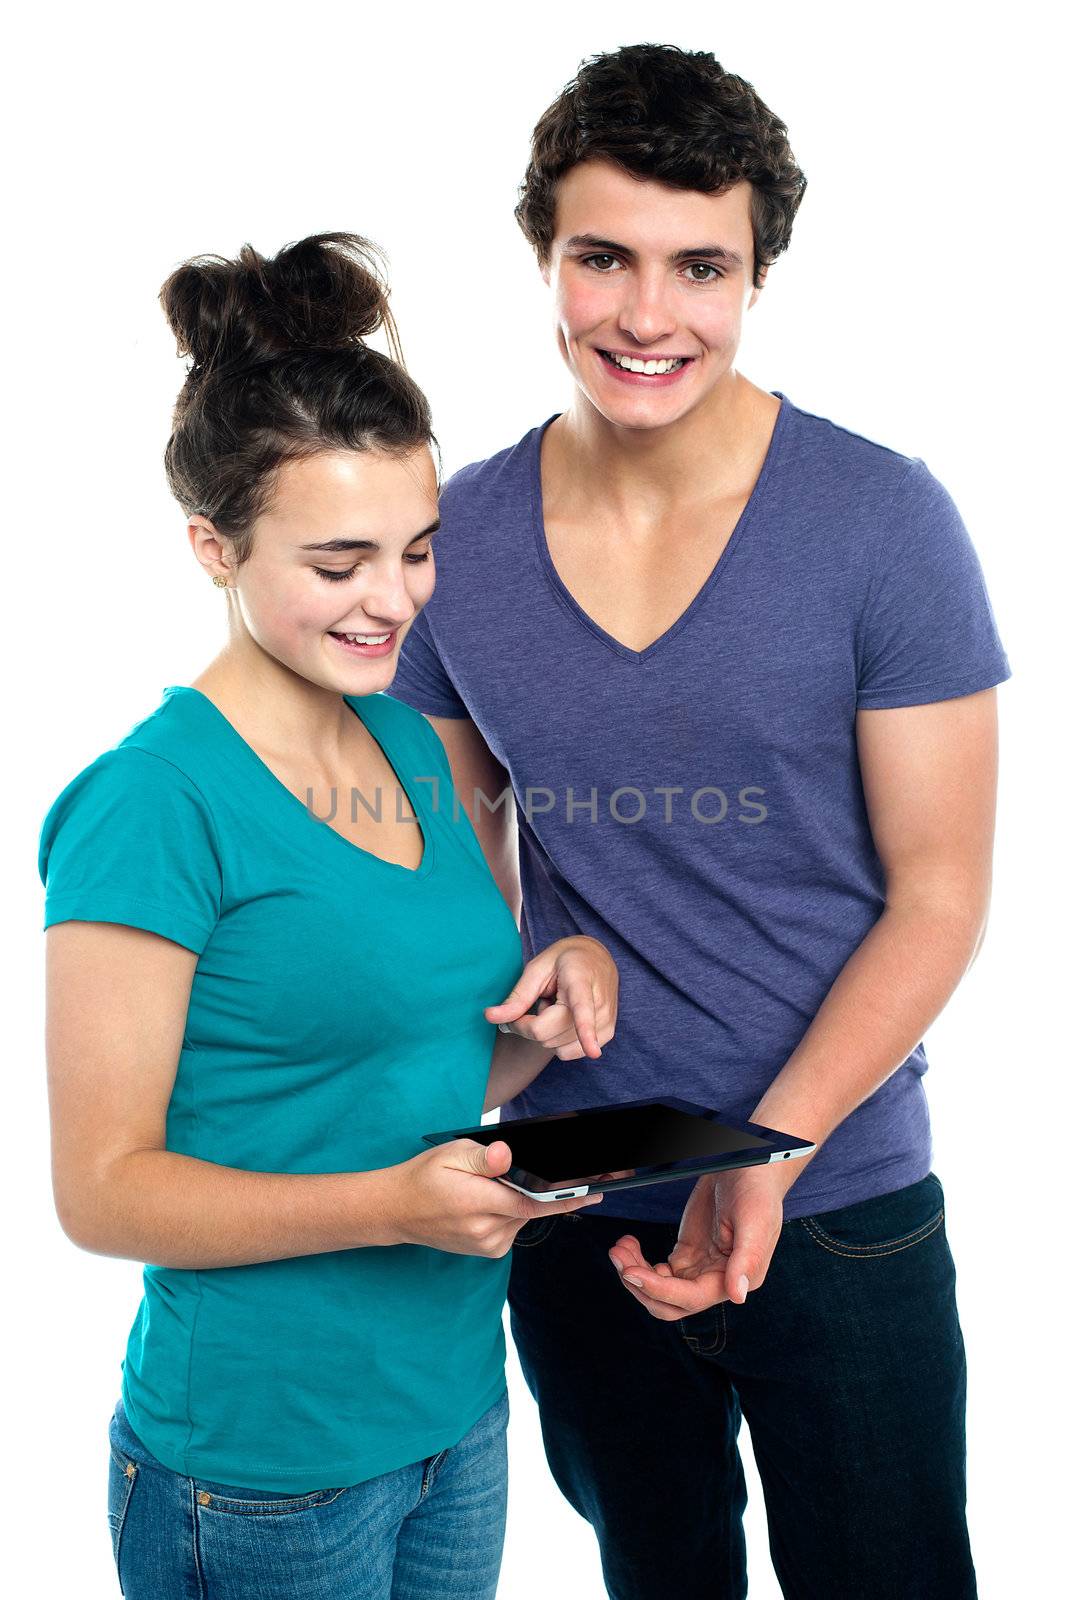 Gorgeous girl with her partner pointing at tablet pc while boyfriend is smilingly looking at camera